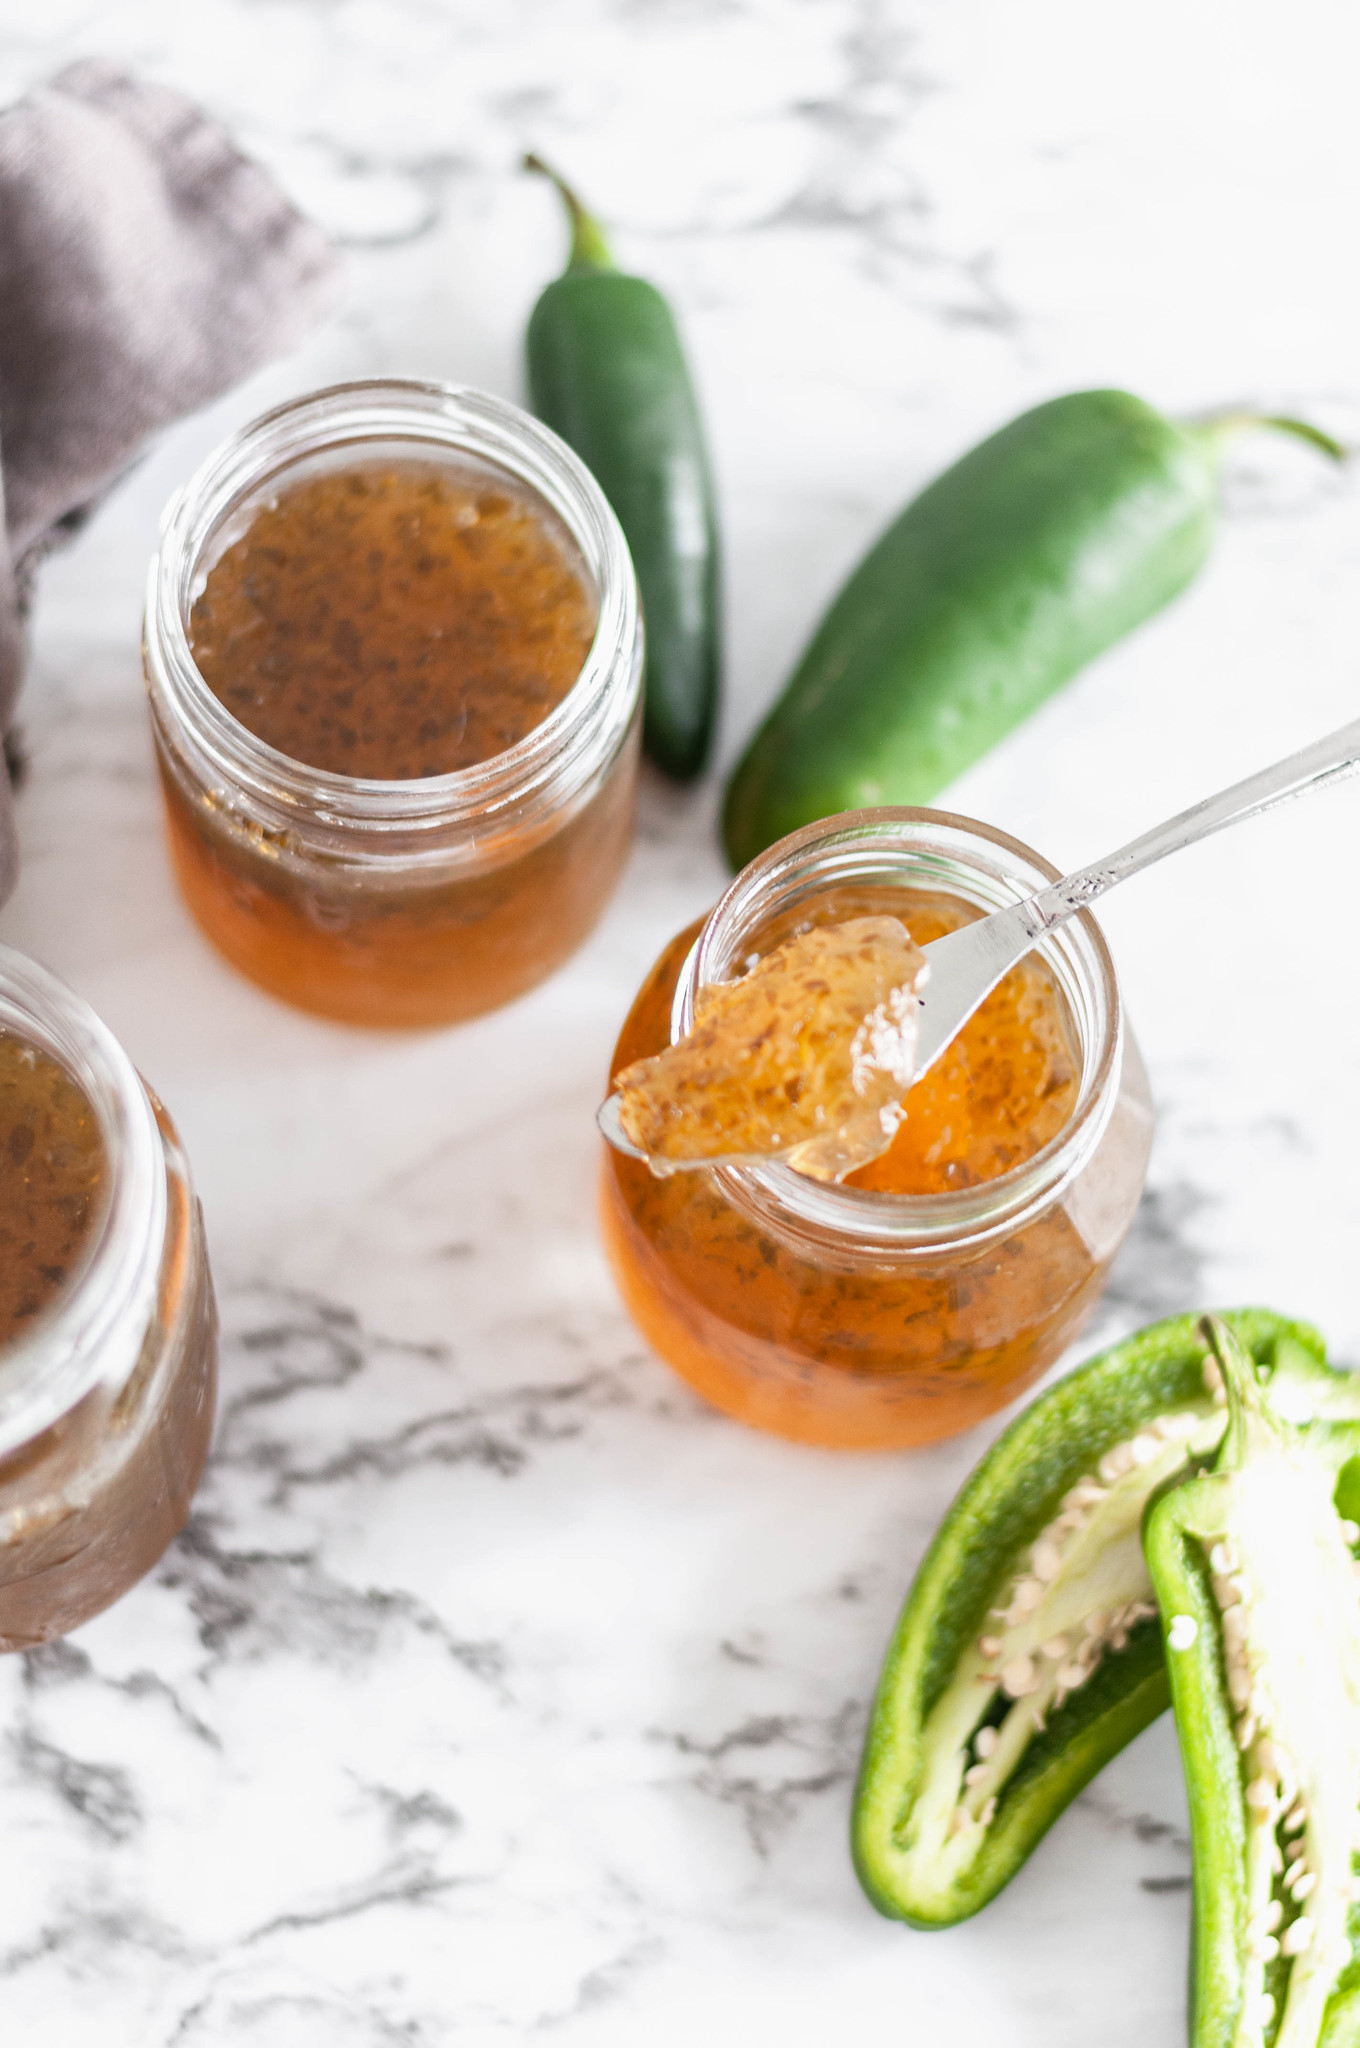 Homemade Jalapeno Jelly is easier than you would think and so delicious on all the things. Slather it on hot cornbread, a juicy burger or use it as a dip.